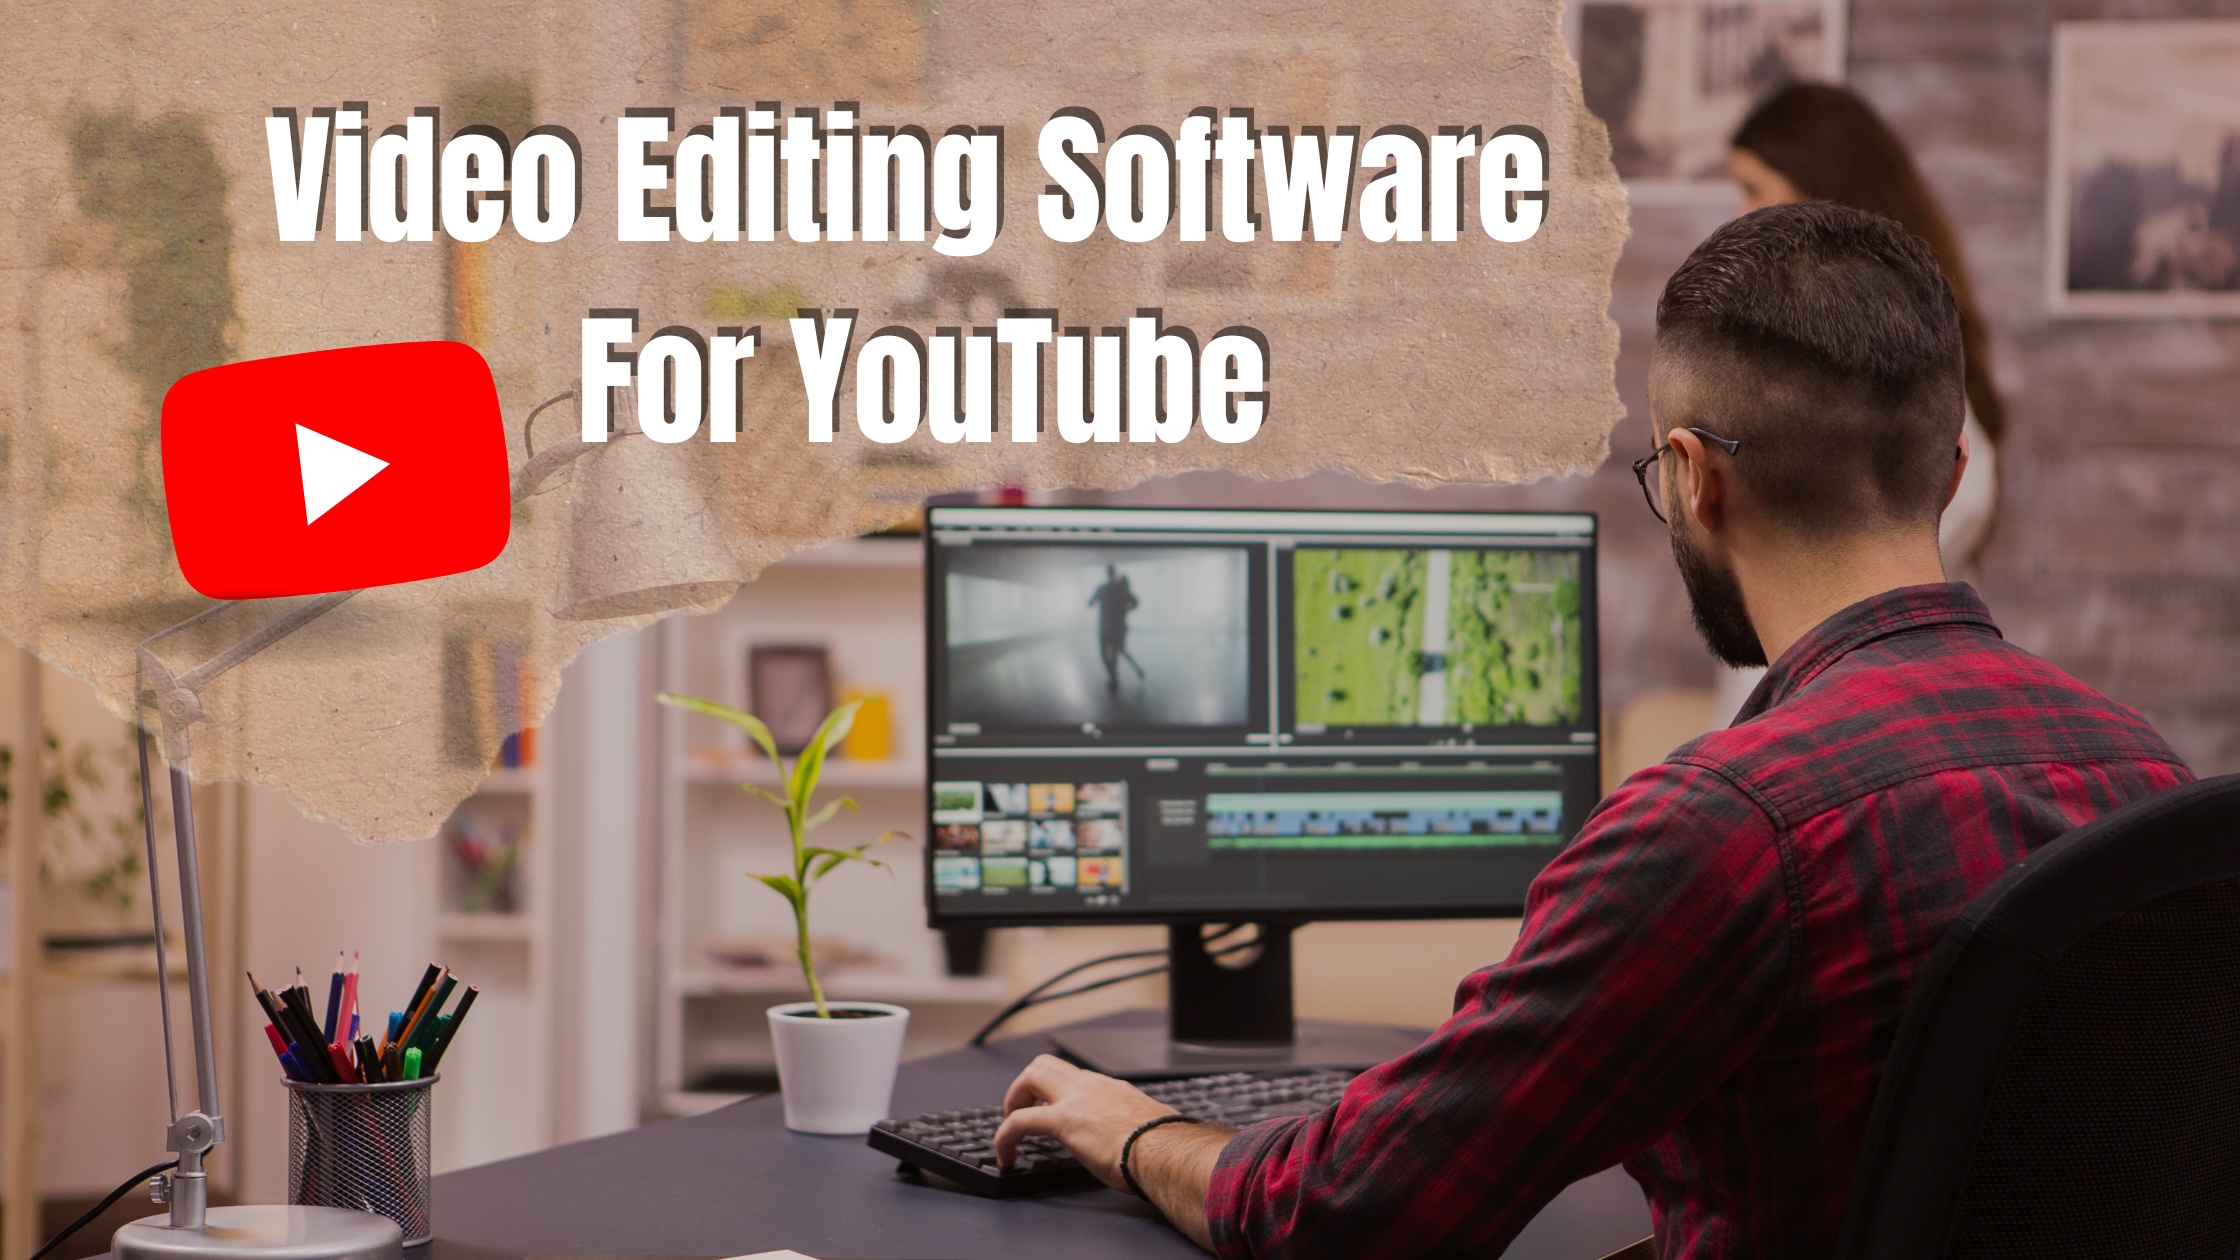 Video Editing Software For YouTube